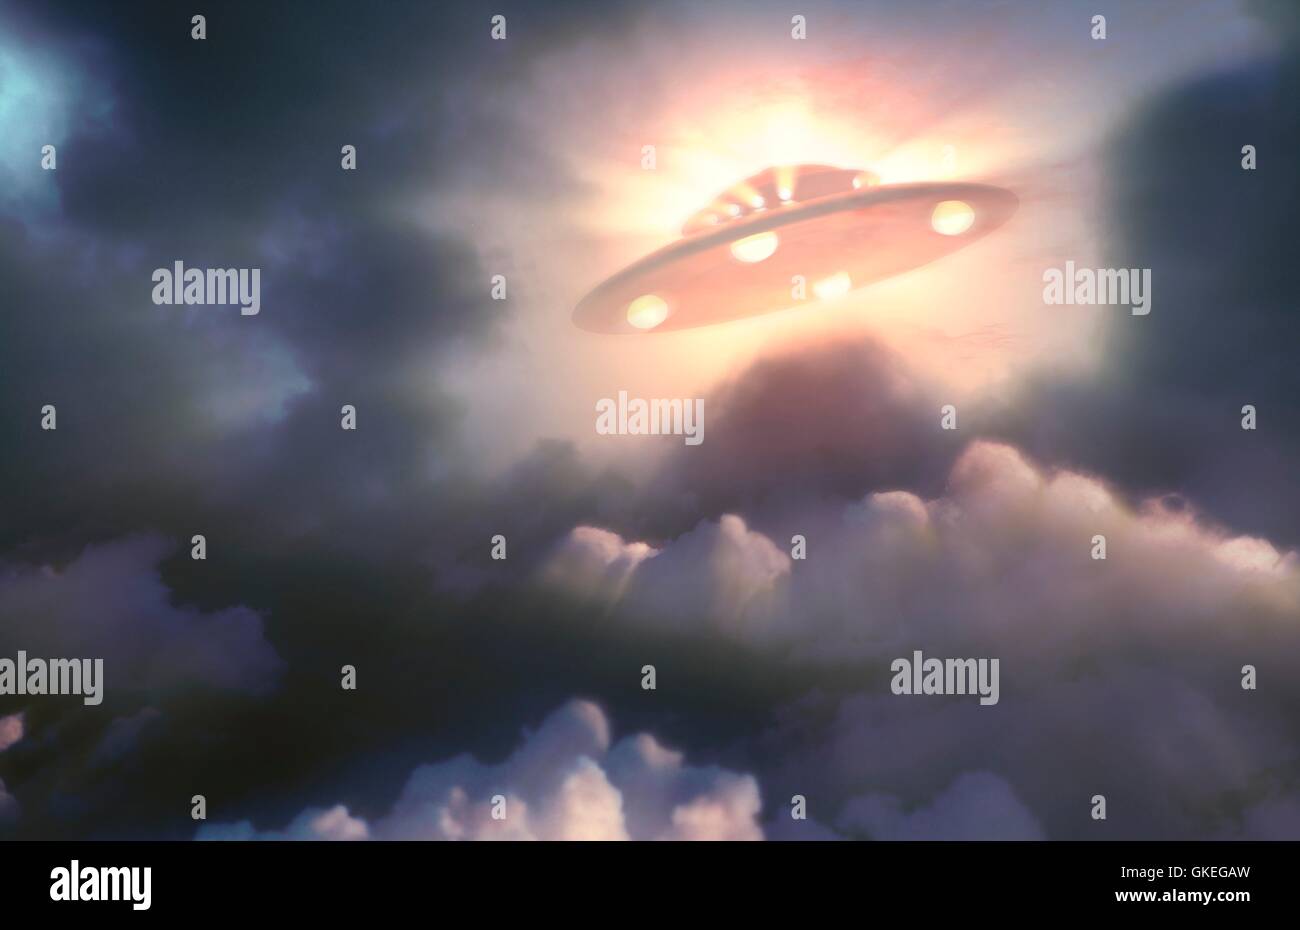 Artwork of a UFO or unidentified flying object, seen above a background of clouds. Stock Photo